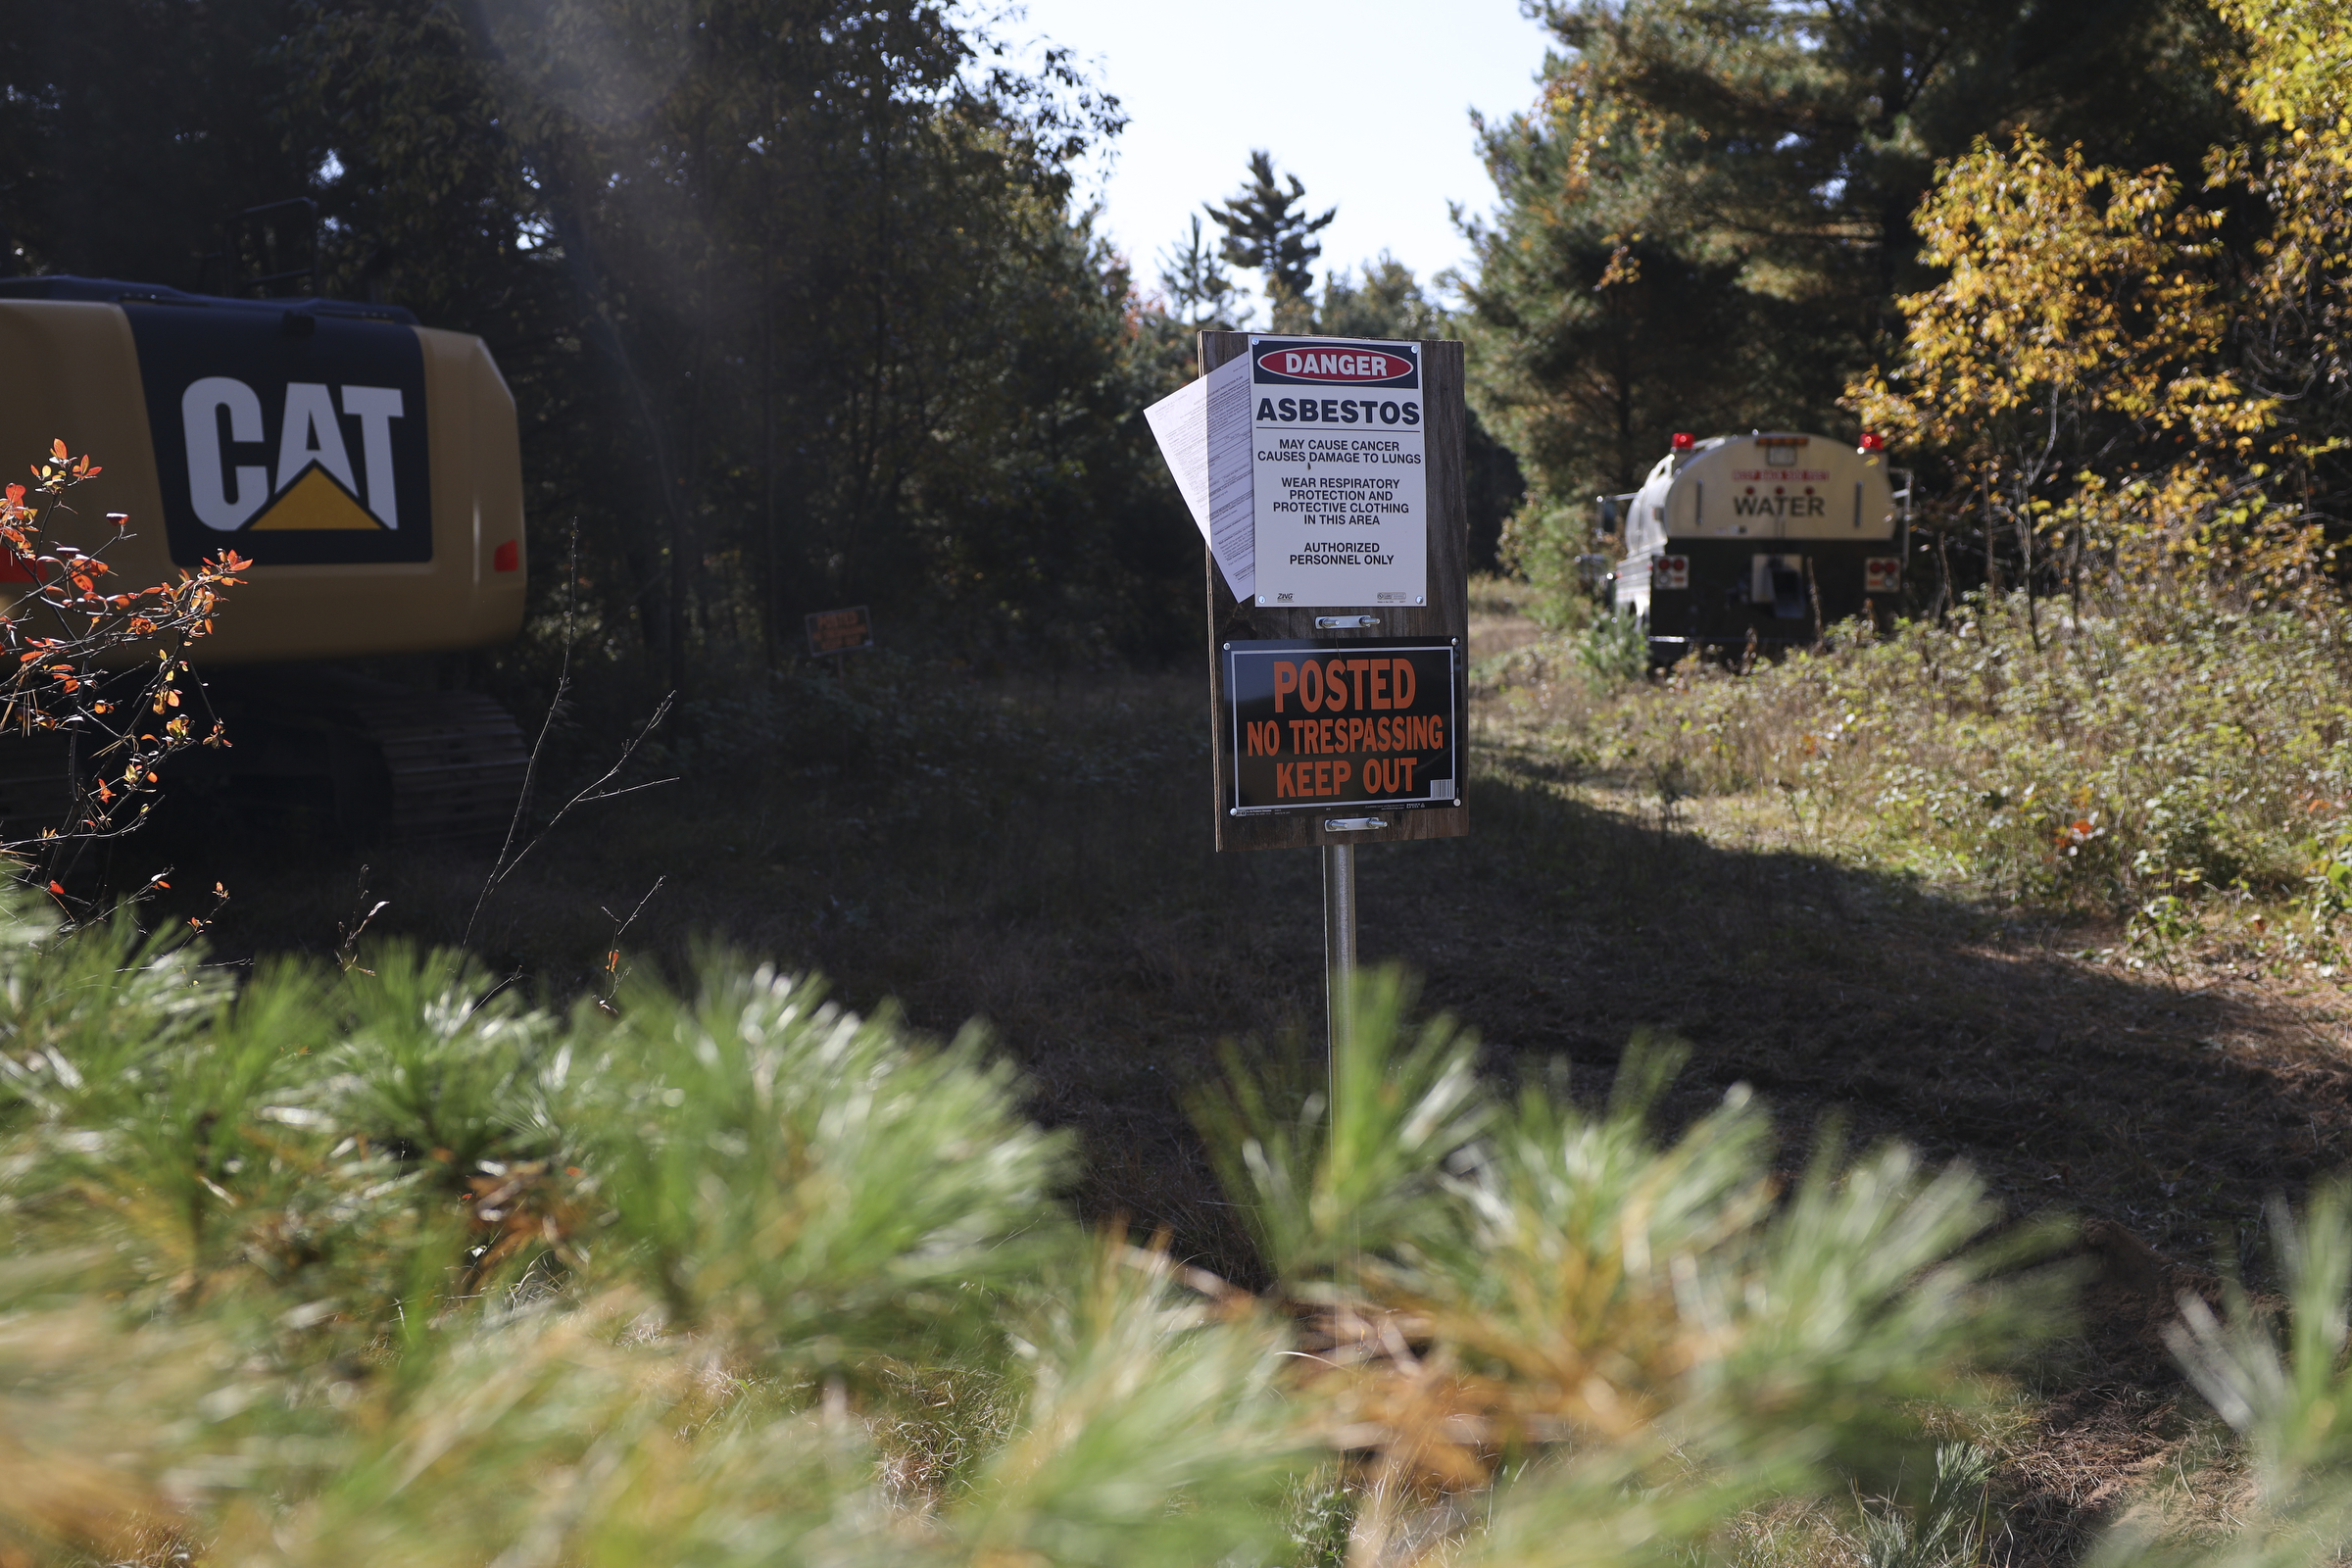 A sign on Zach Skrede’s property in the town of Easton in Adams County, Wis., warns about the presence of asbestos